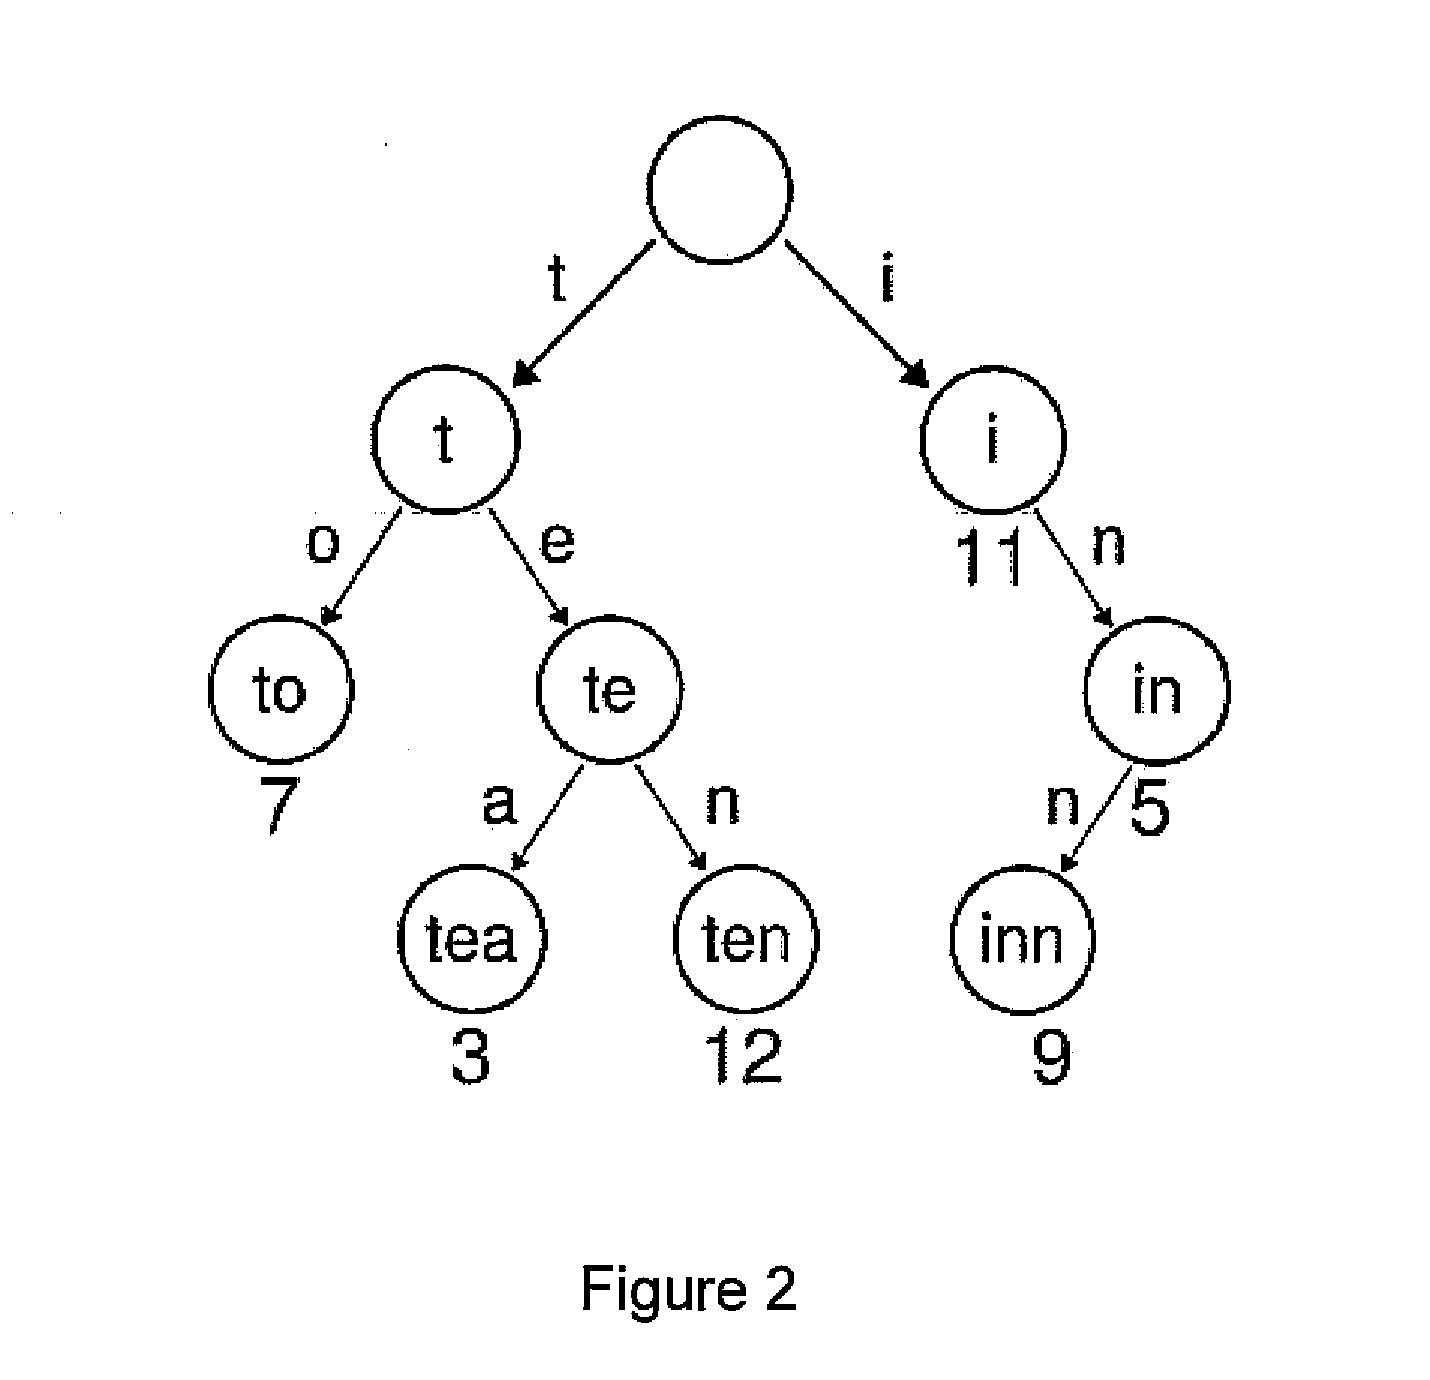 Systems and methods for building an electronic dictionary of multi-word names and for performing fuzzy searches in the dictionary